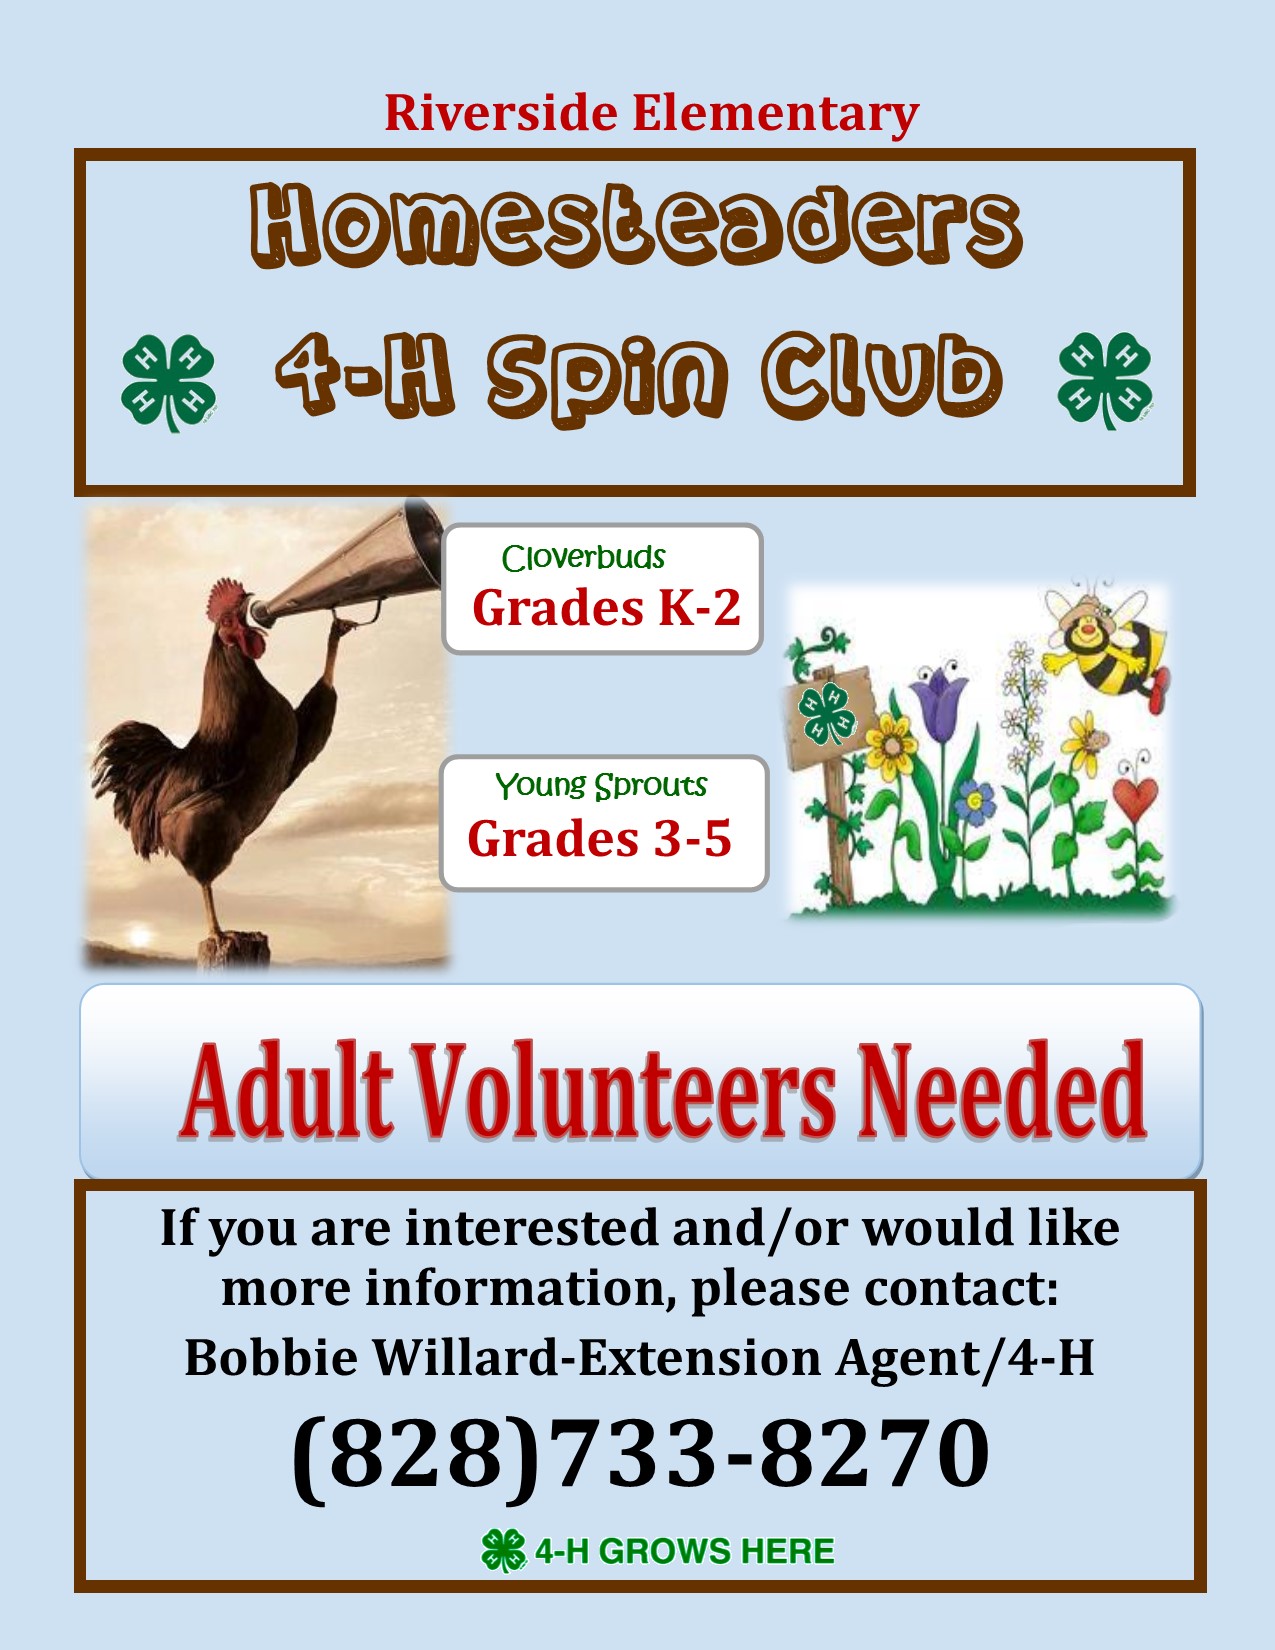 Homesteaders 4-H Spin CLub. Cloverbuds Grades K – 2, Young Sprouts Grades 3 – 5. Adult Volunteers Needed. If you are interested and/or would like more information, please contact: Bobbie Willard-Extenstension Agent/4-H. (828)733-8270.